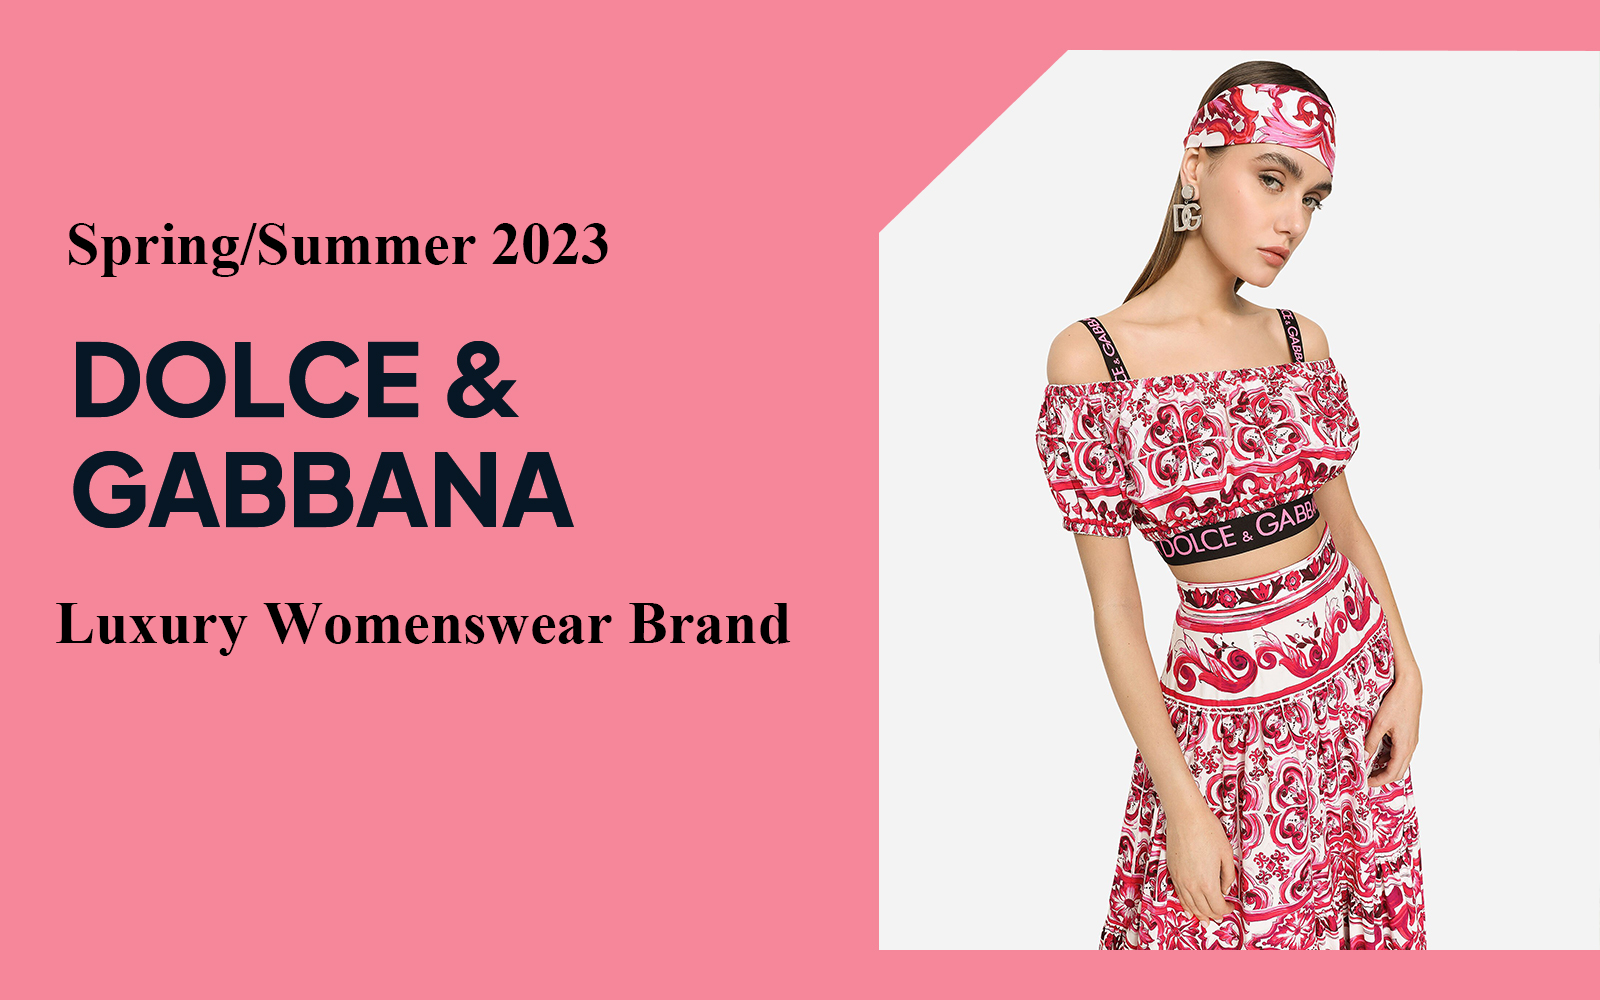 Unrestricted Elegance -- The Analysis of Dolce & Gabbana The Luxury Womenswear Brand